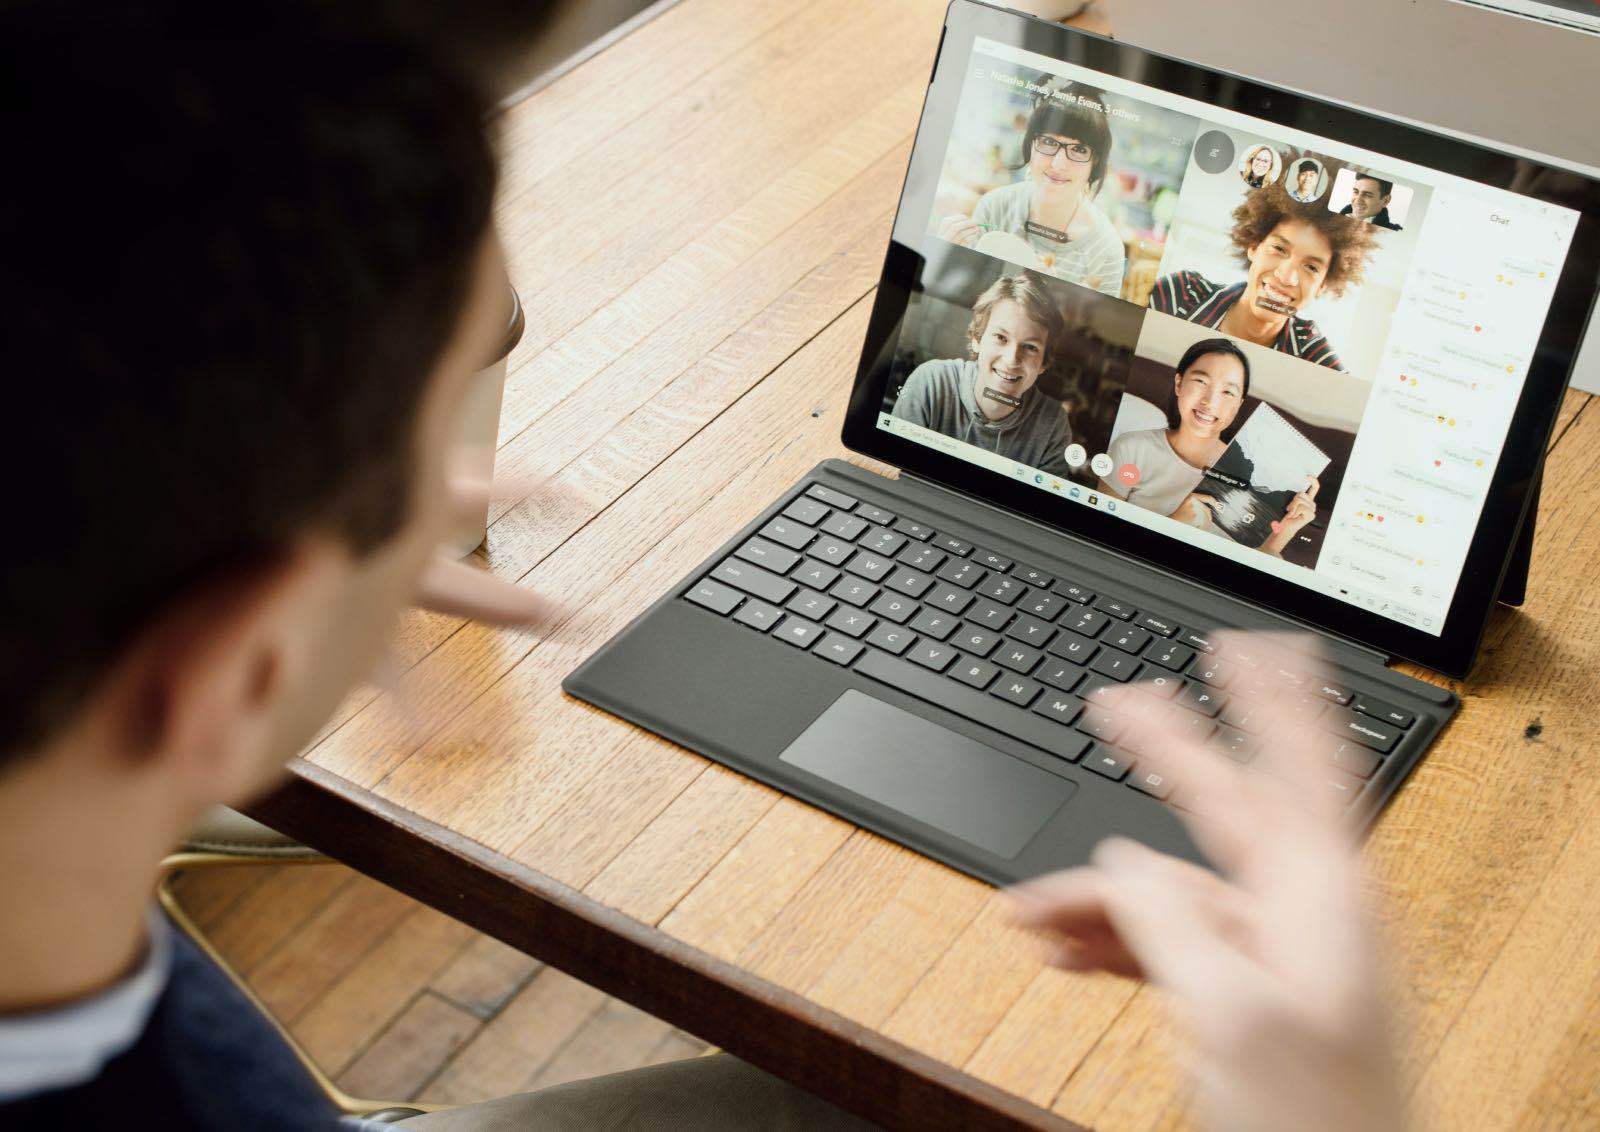 Working Remote? You Need the Best Video Conferencing Software for 2021